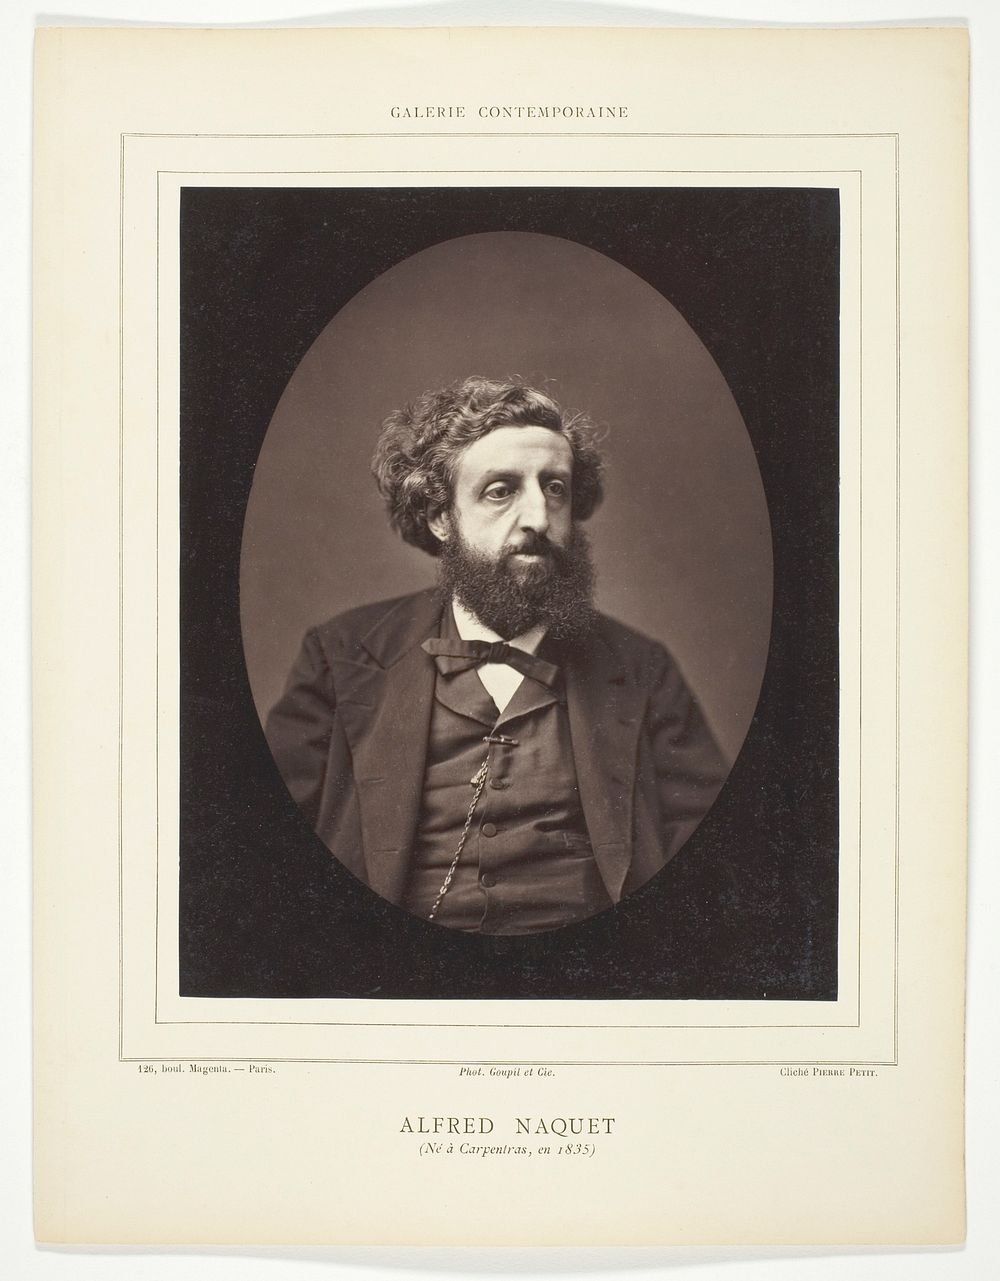 Alfred Naquet (French chemist and politician, 1834-1916) by Pierre Petit